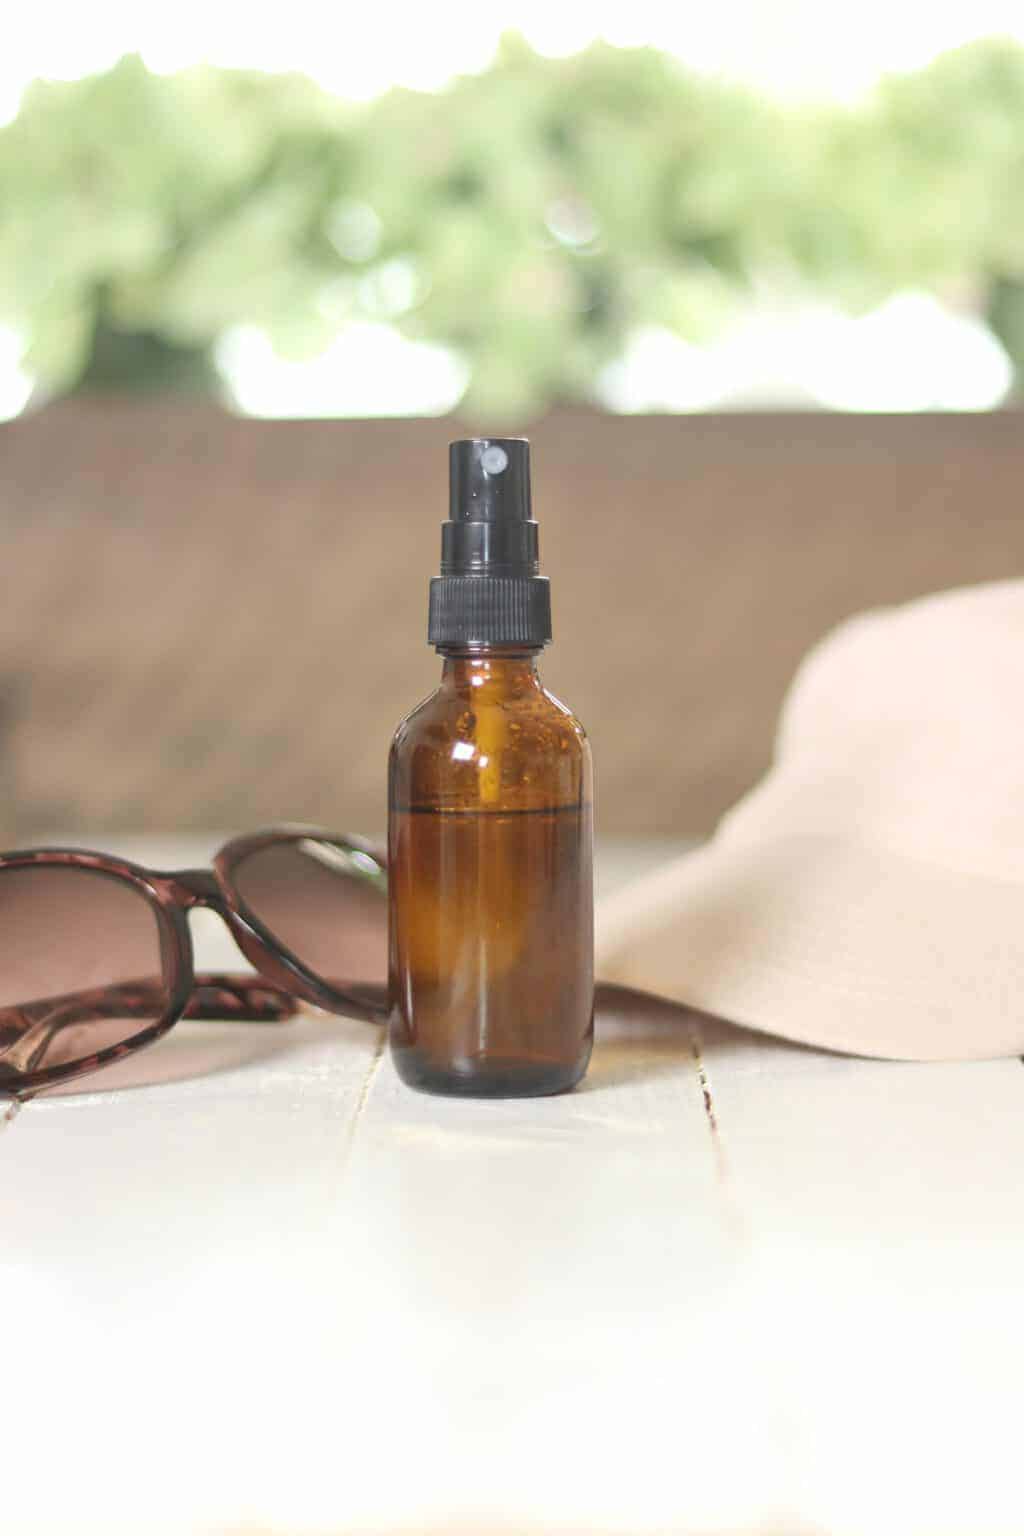 Sunburn relief spray in 2 ounce amber glass bottle with sun glasses and ballcap on table.